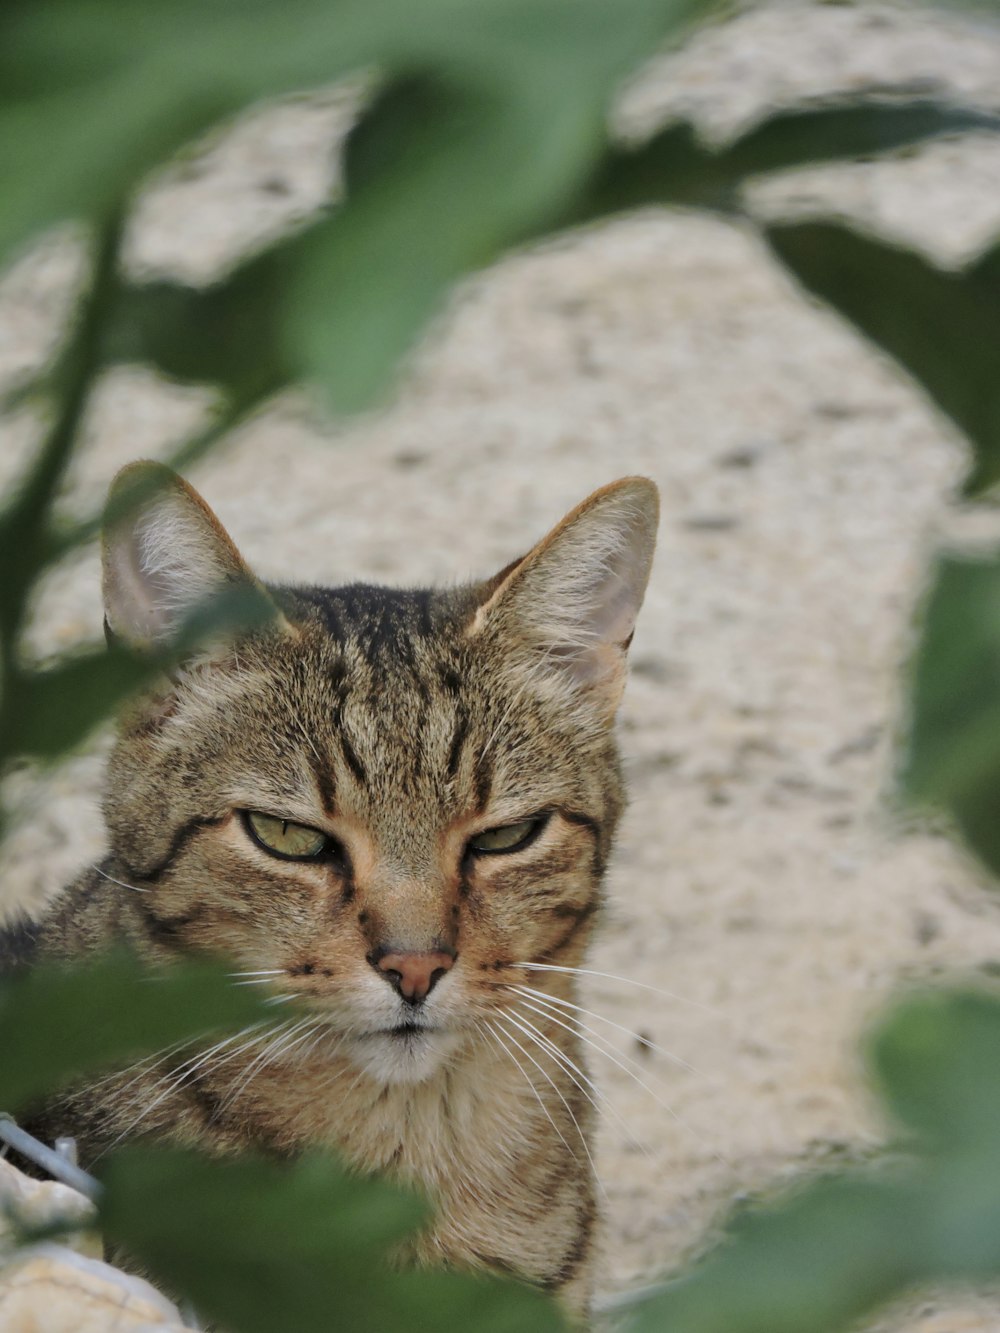 a close up of a cat behind some leaves